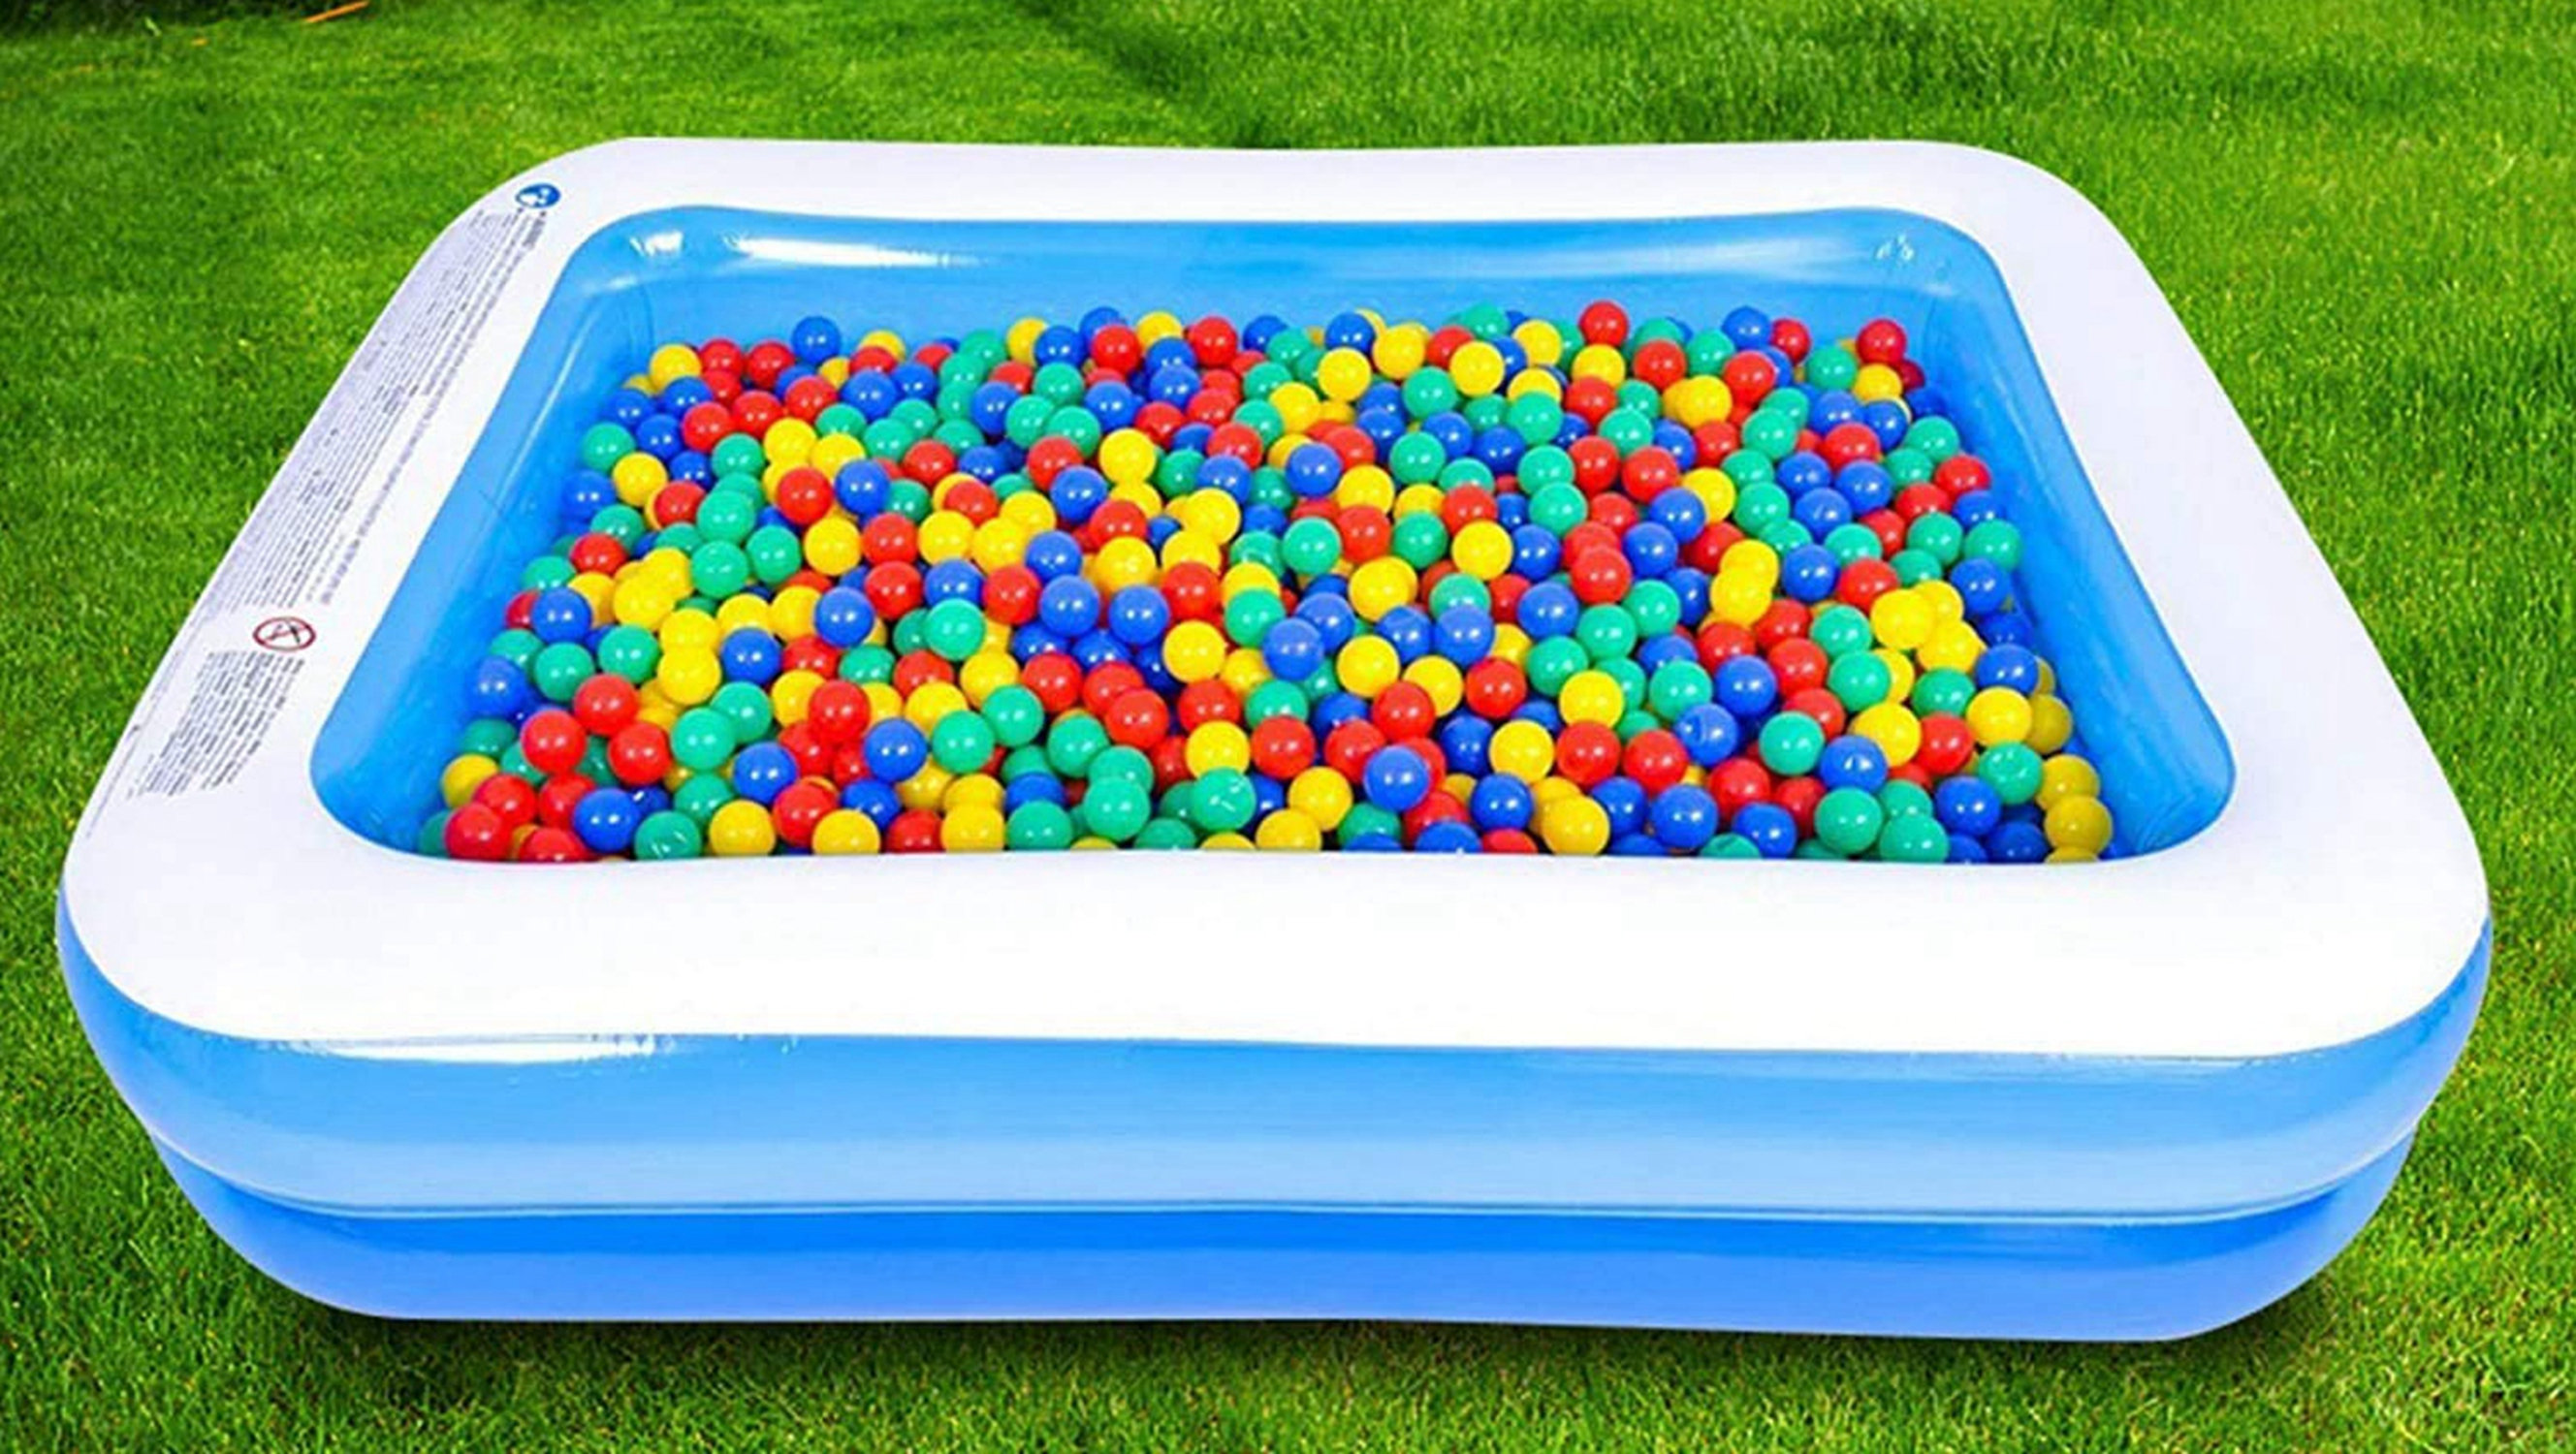 Family Inflatable Swimming Pool,79x59x20 Full-Sized Inflatable Lounge Pool for Kiddie,Kids,Adult,Inflatable Water Ball Pool for Outdoor,Garden,Backyard,Summer Water Party Pool with Inflator Pump 